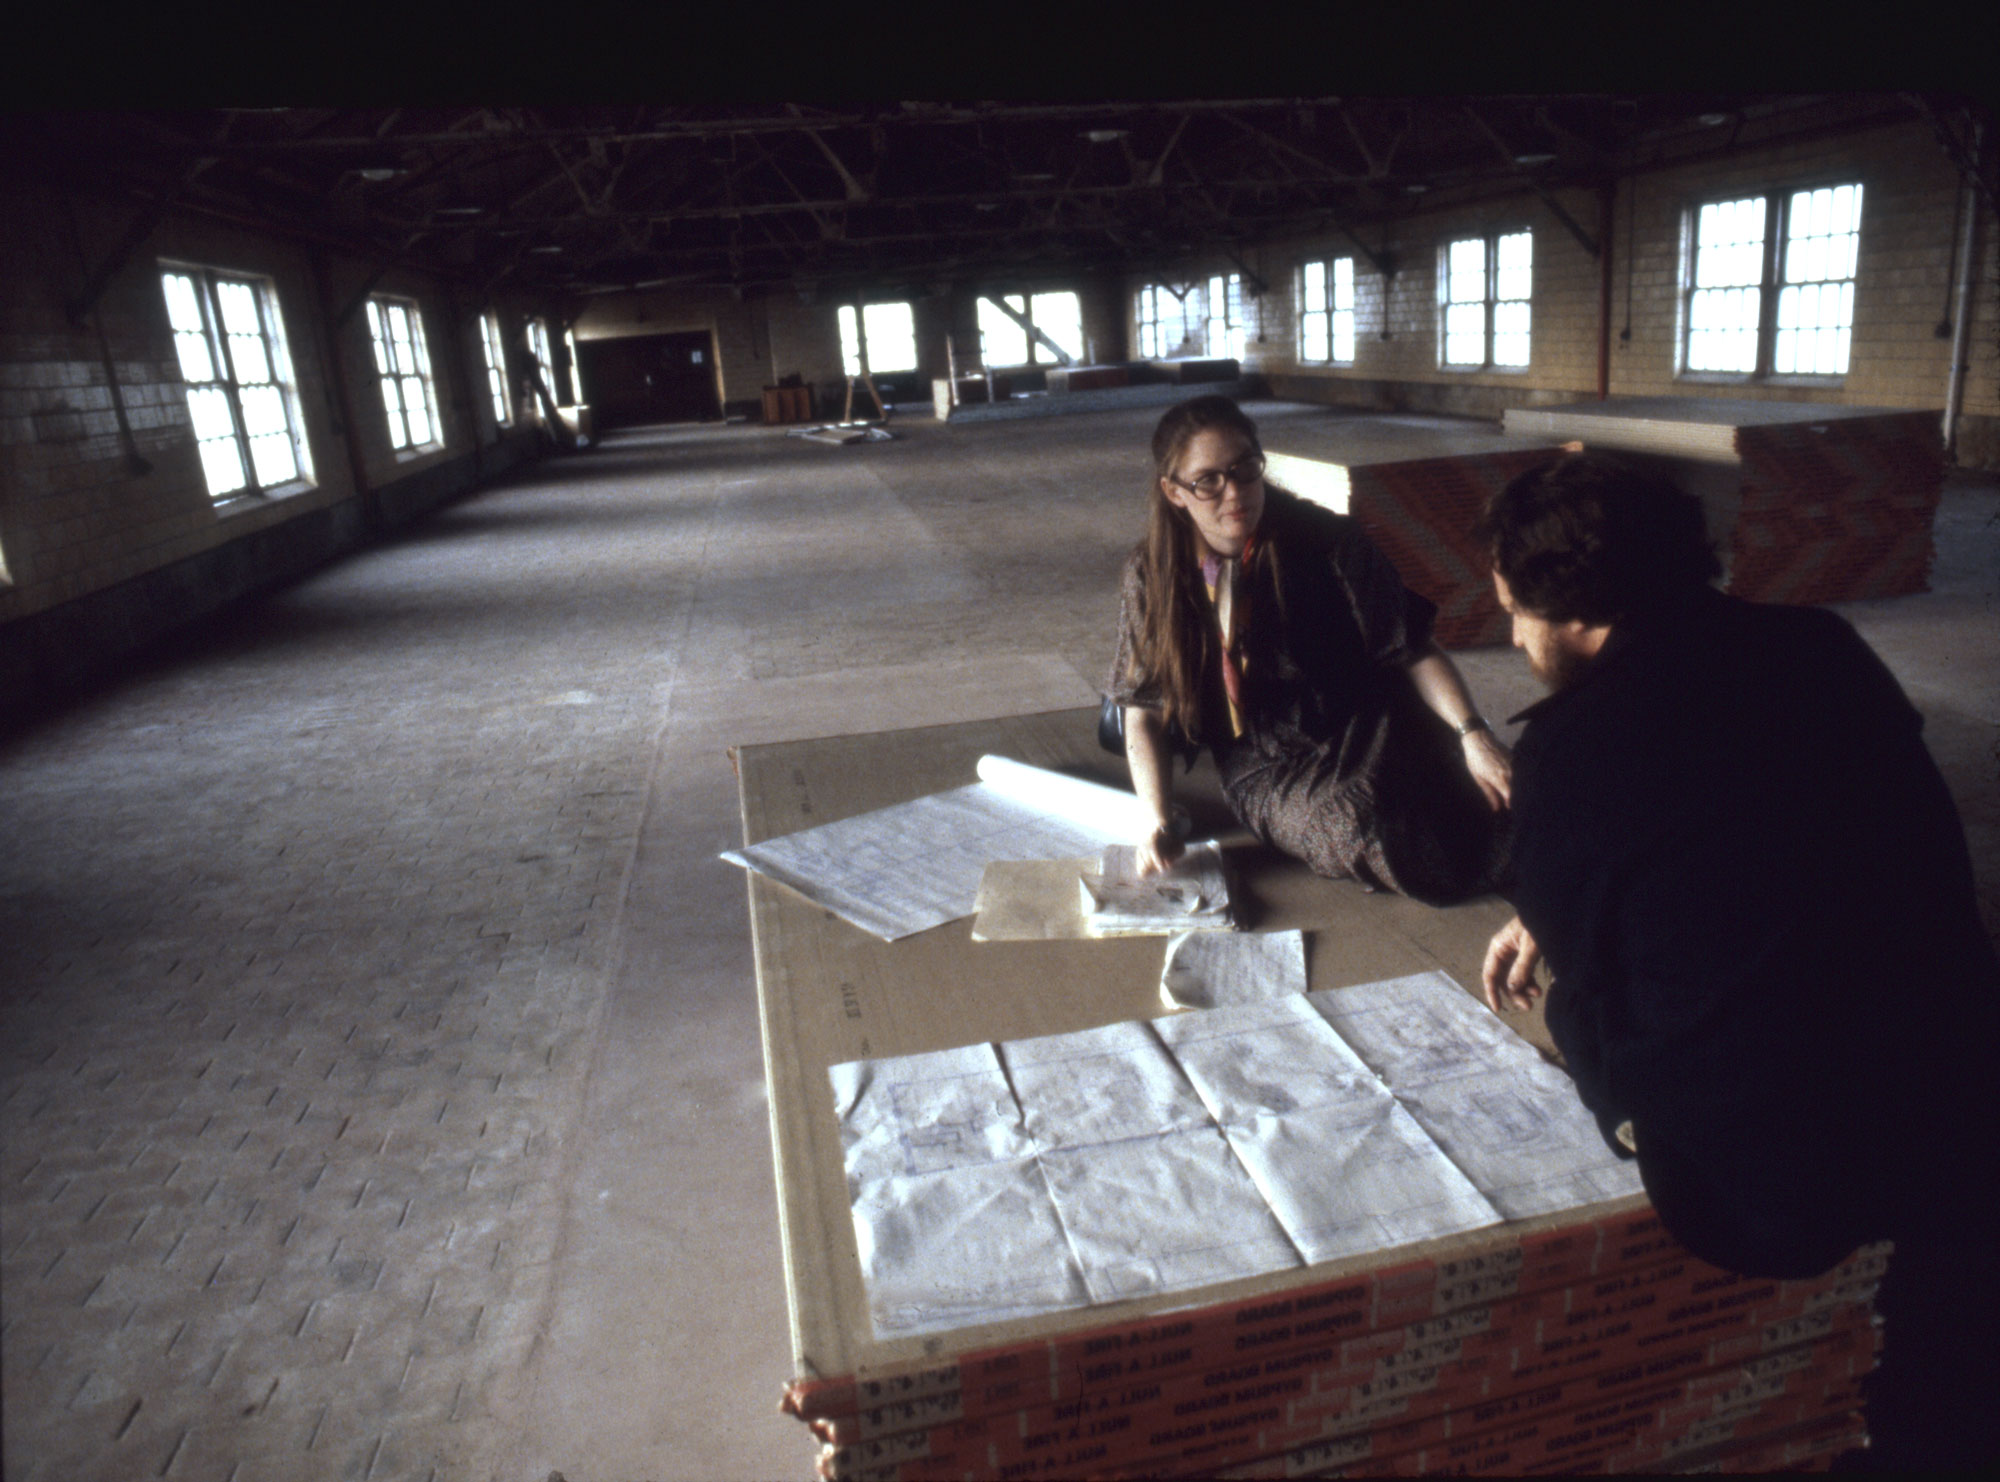 Two people sit on stack of drywall in a cavernous warehouse space looking at architectural plans